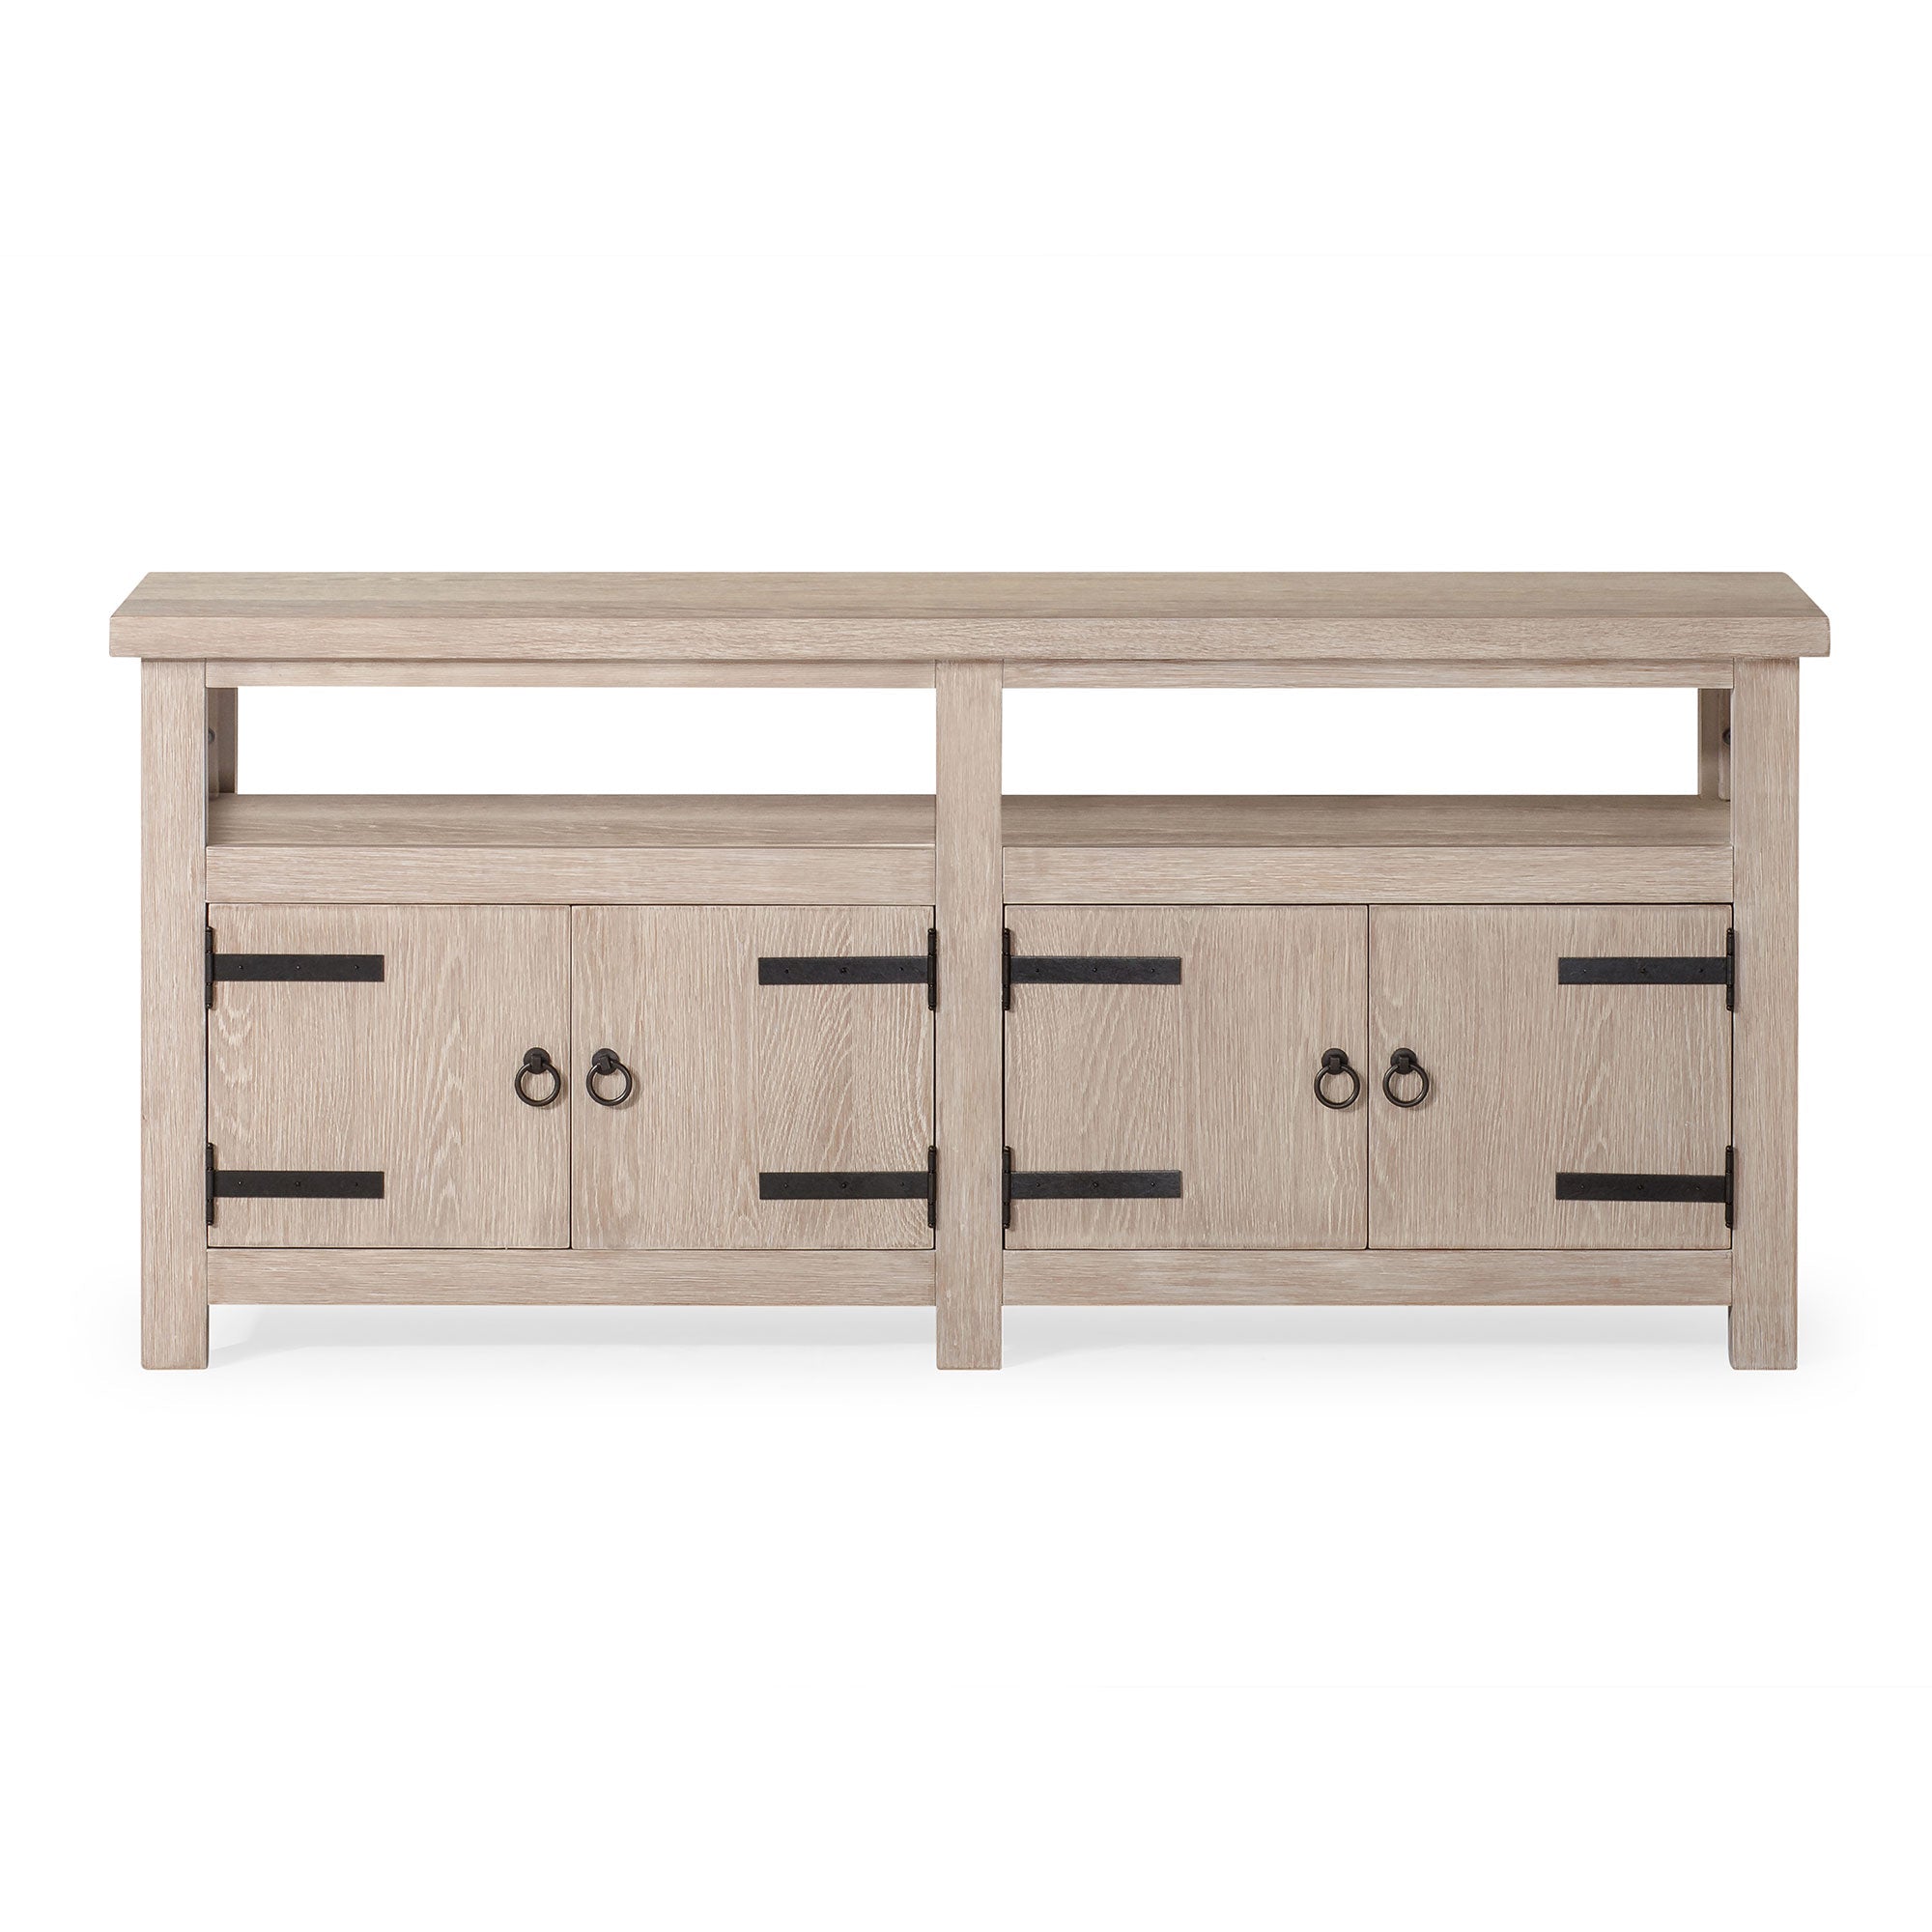 Maven-Lane-Luca-Rustic-Wooden-Media-Unit-in-Weathered-White-Finish-Entertainment-Centers-&-TV-Stands